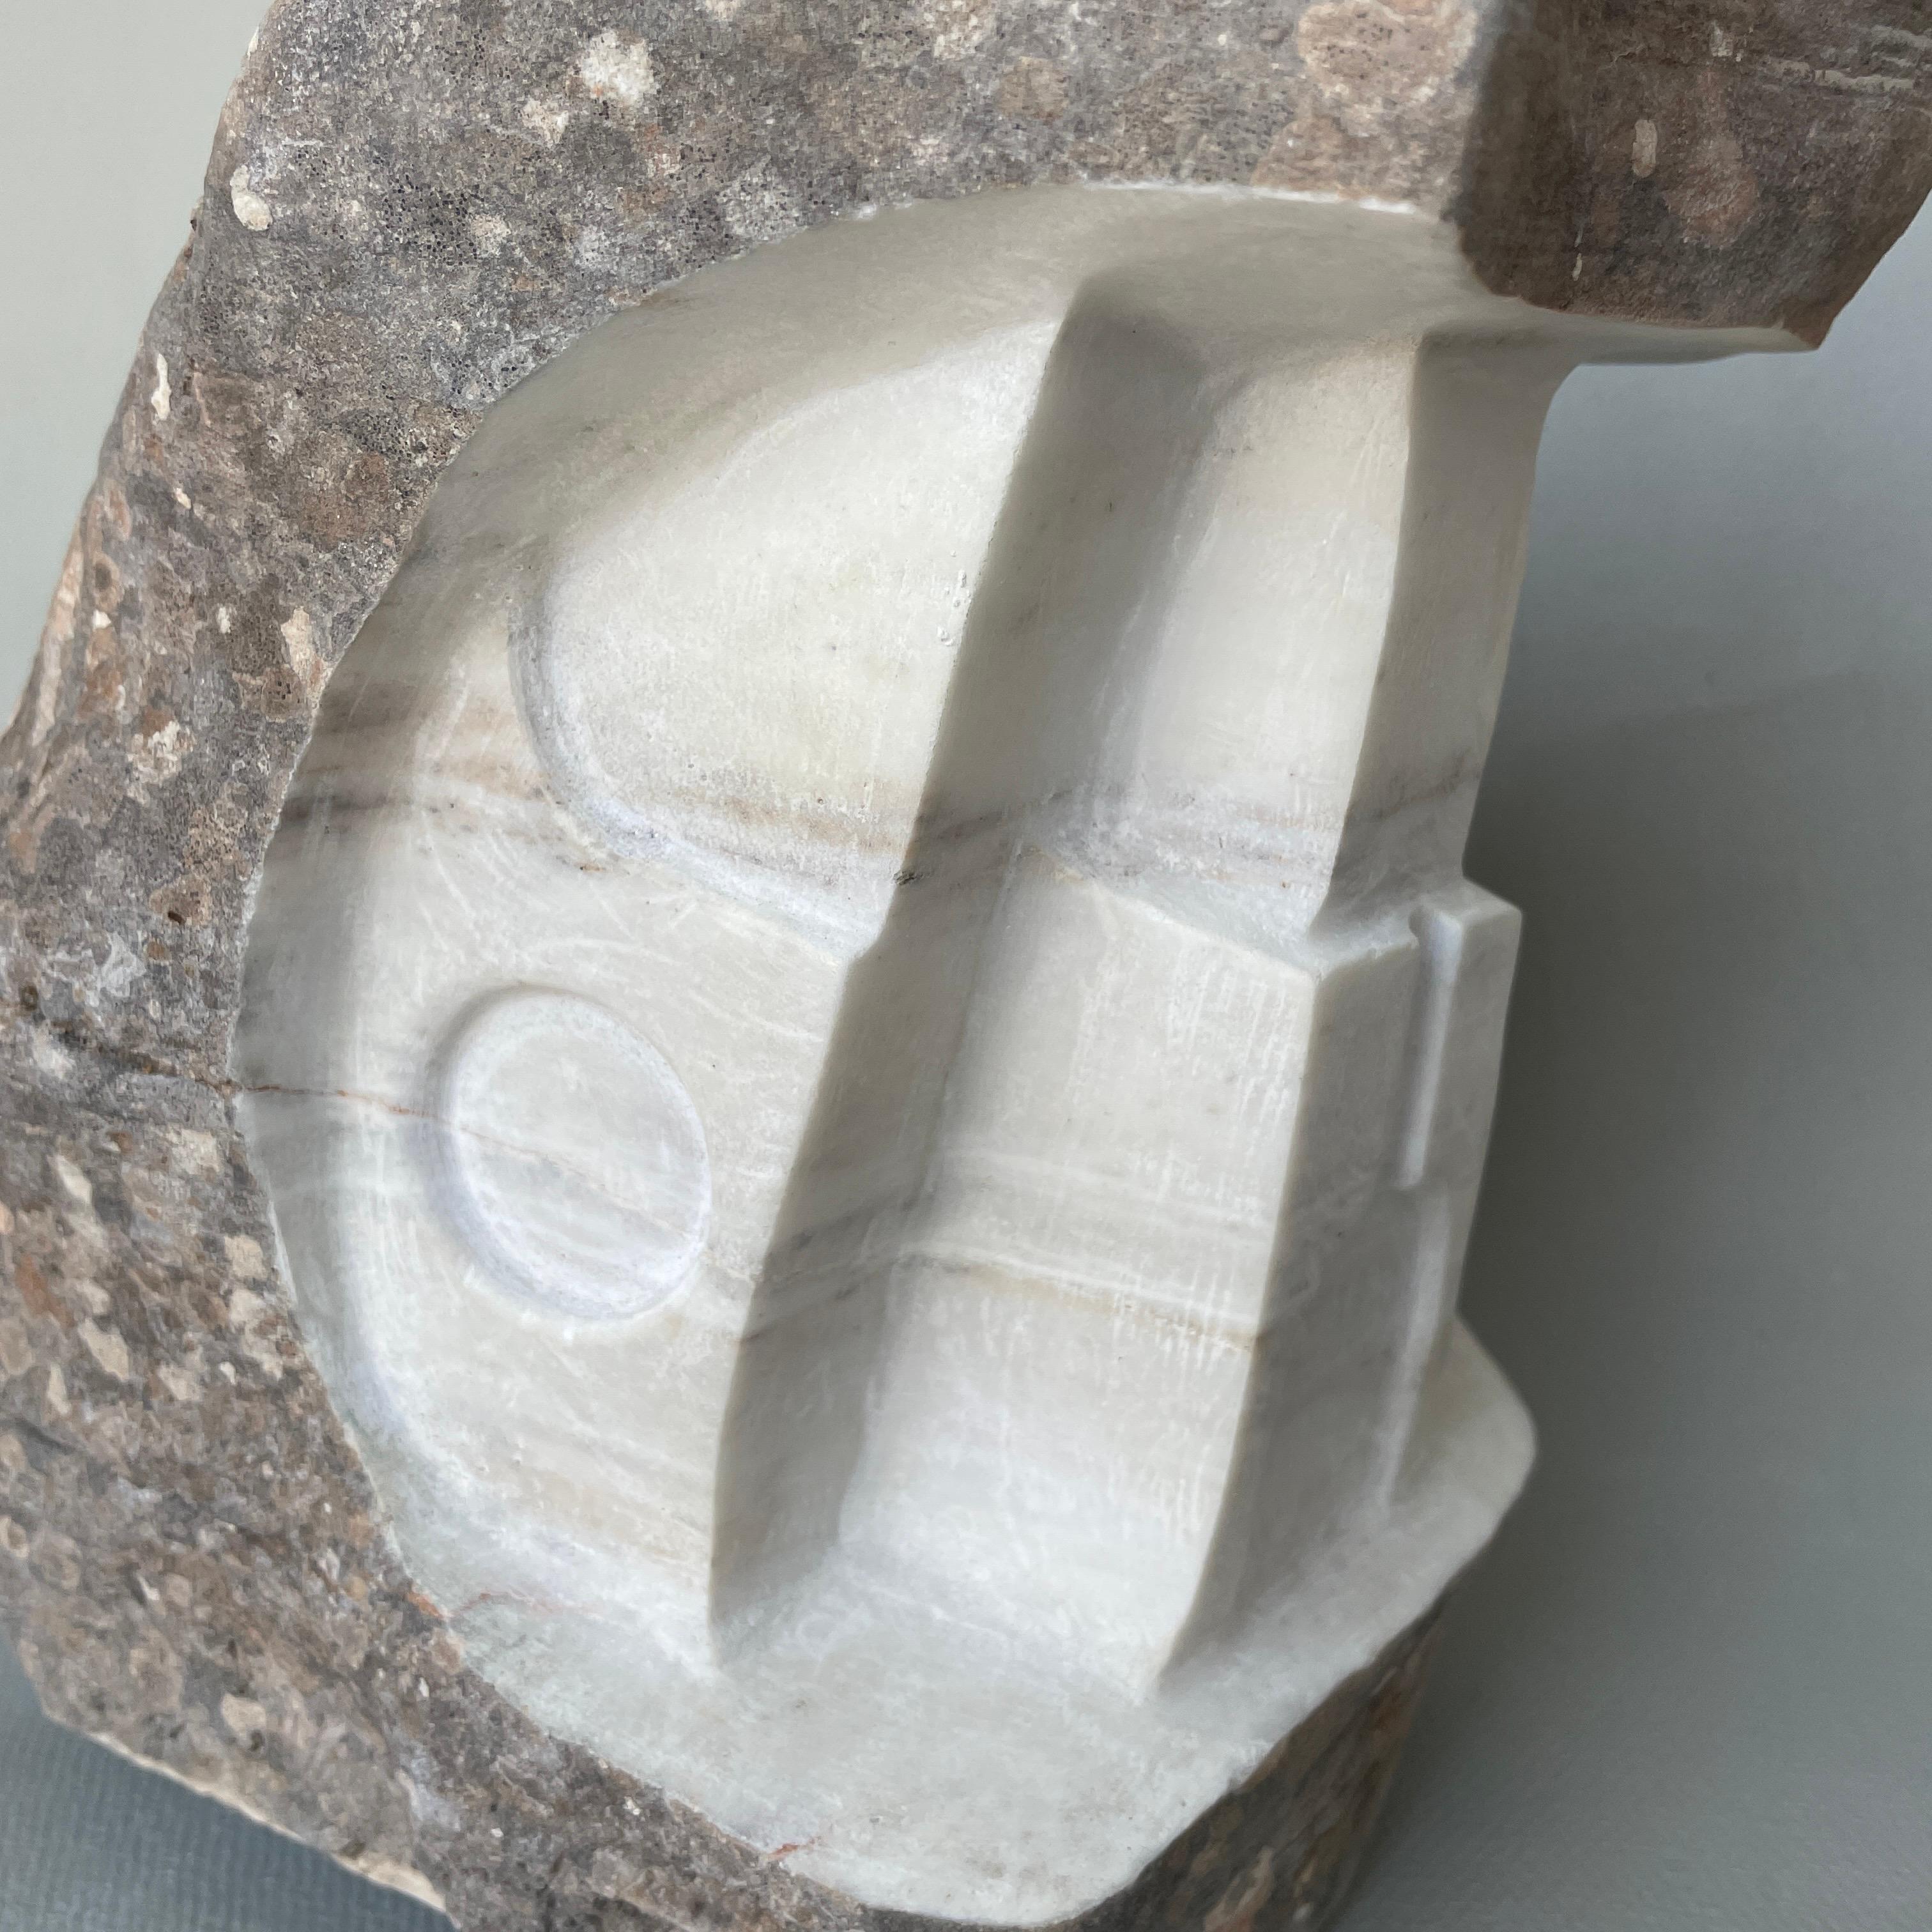 Post-Modern Geometrical Force in Nature Marble Sculpture by Tom Von Kaenel For Sale